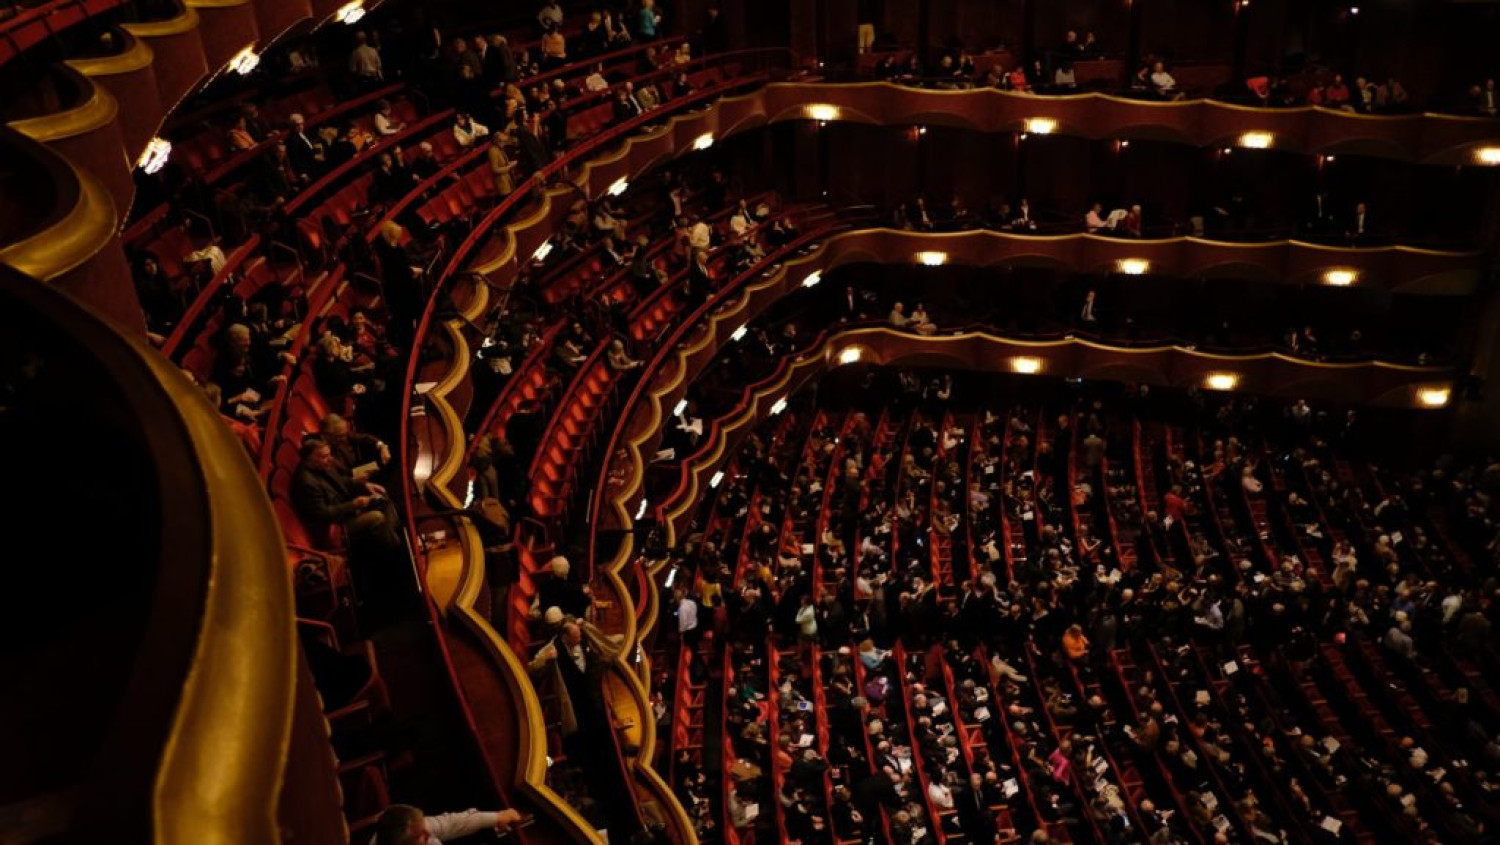 The image shows the inside of the Met Opera in New York City. It looks very extravagant, there are deep red hues and gold colours. There are rows and rows of seats, arranged in an arc shape.